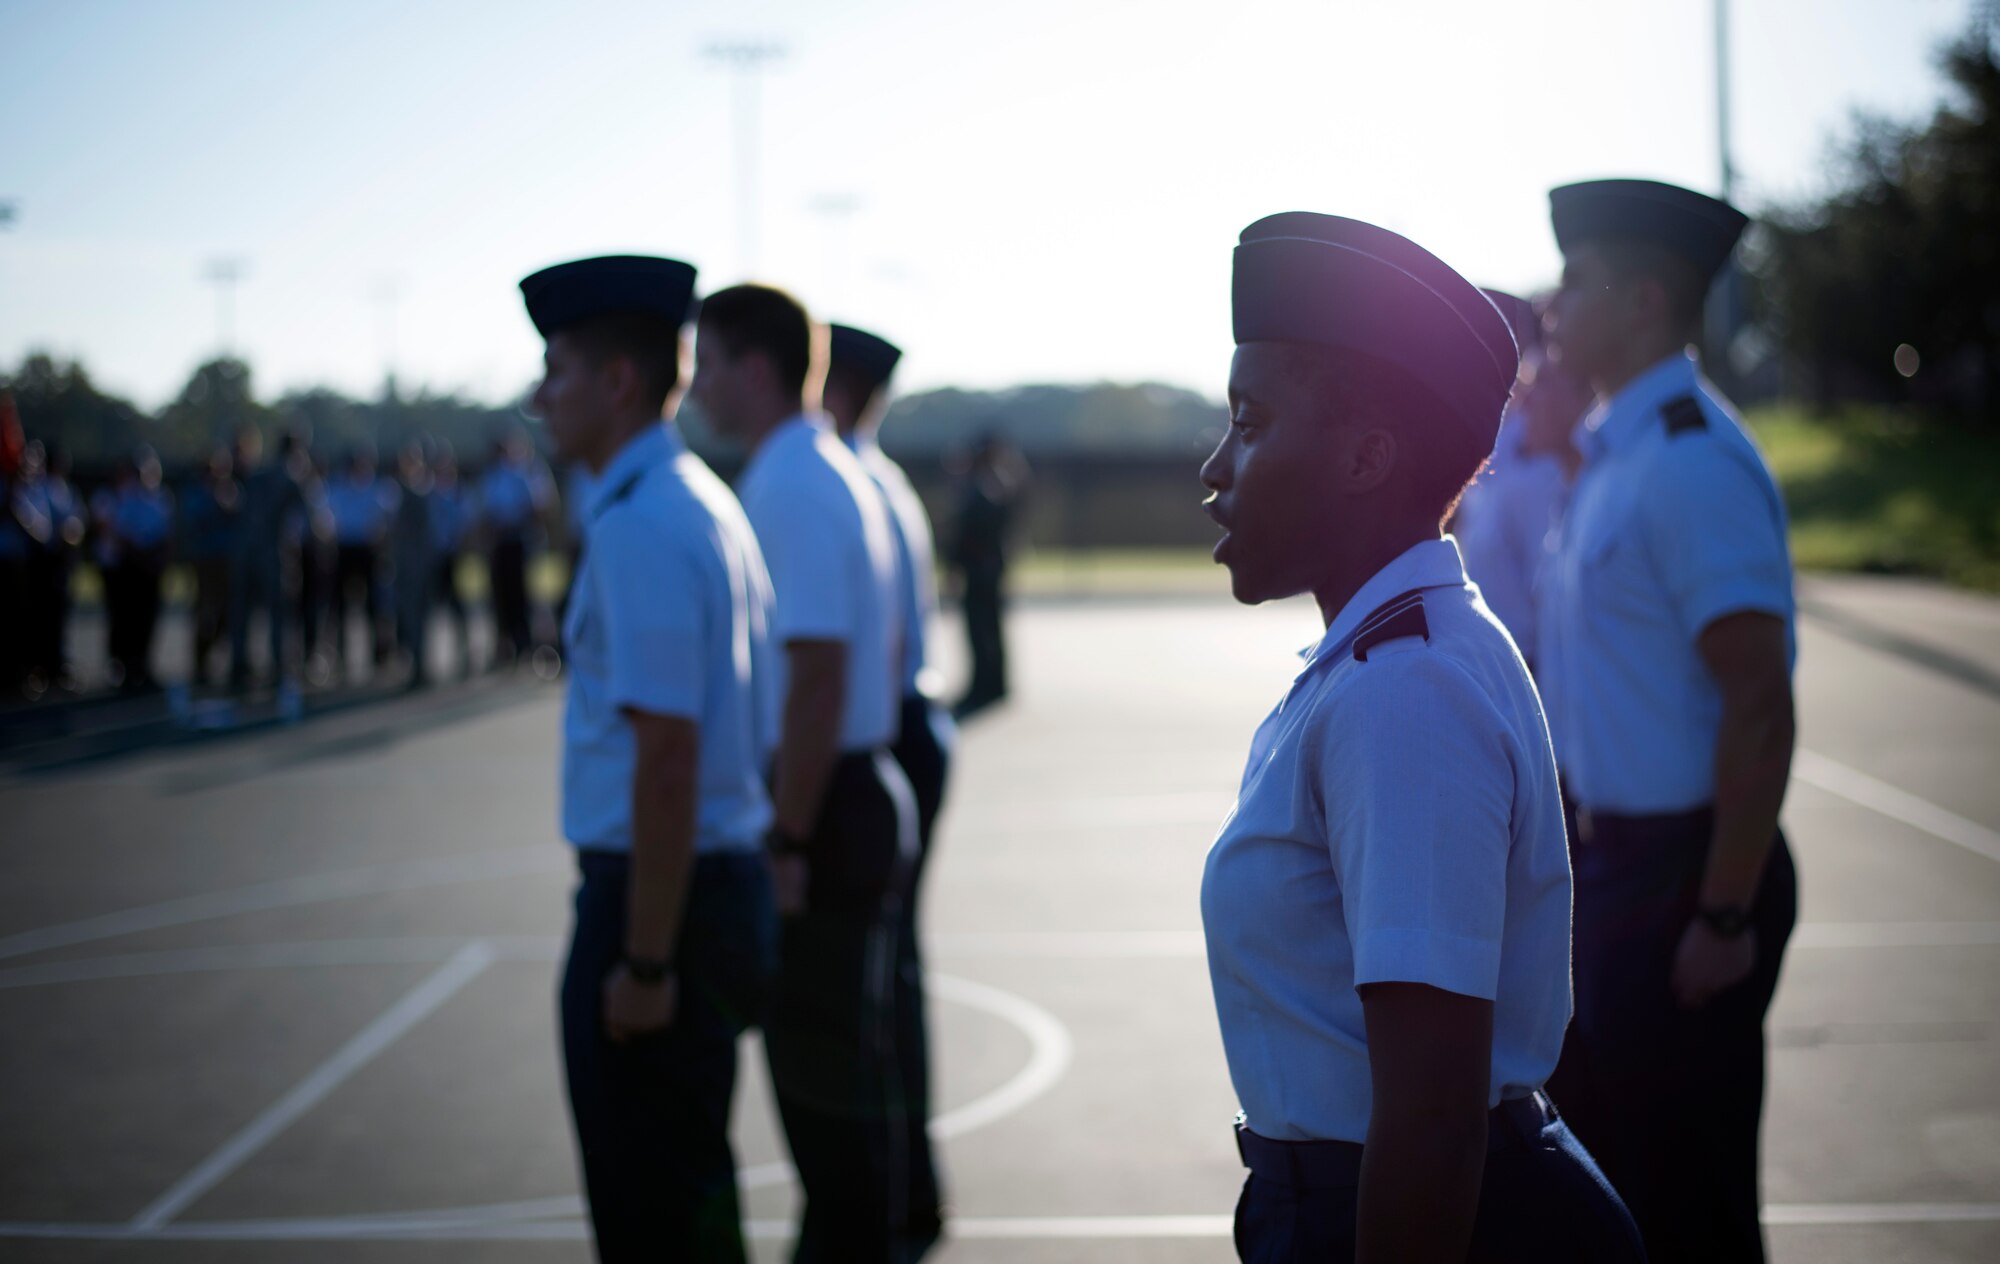 U.S. Air Force Reserve Officer Training Corps cadets from DET-158 at the University of Florida in Tampa, march in detail formation on campus Sept. 20, 2018.